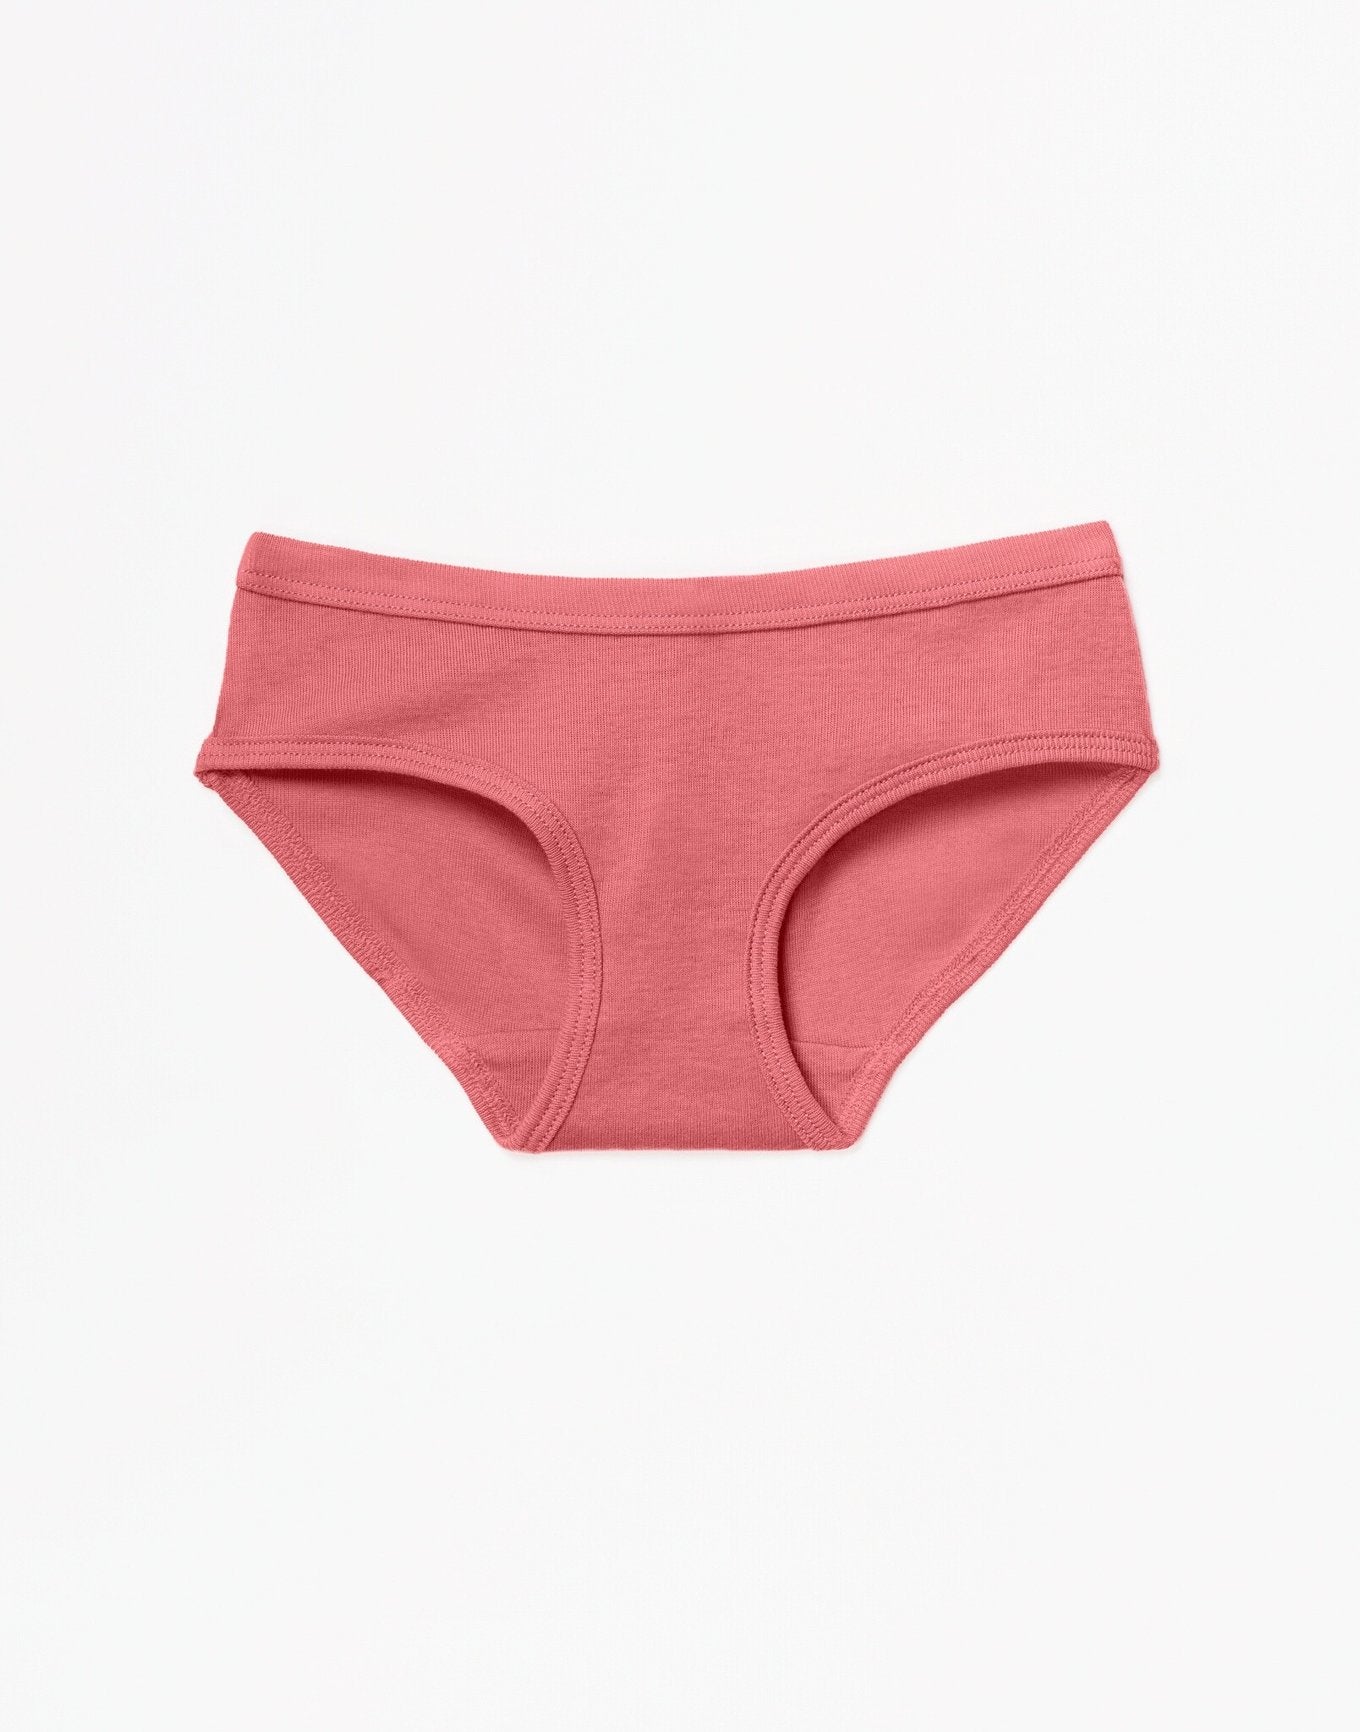 Outlines Kids Alena in color Tea Rose and shape underwear